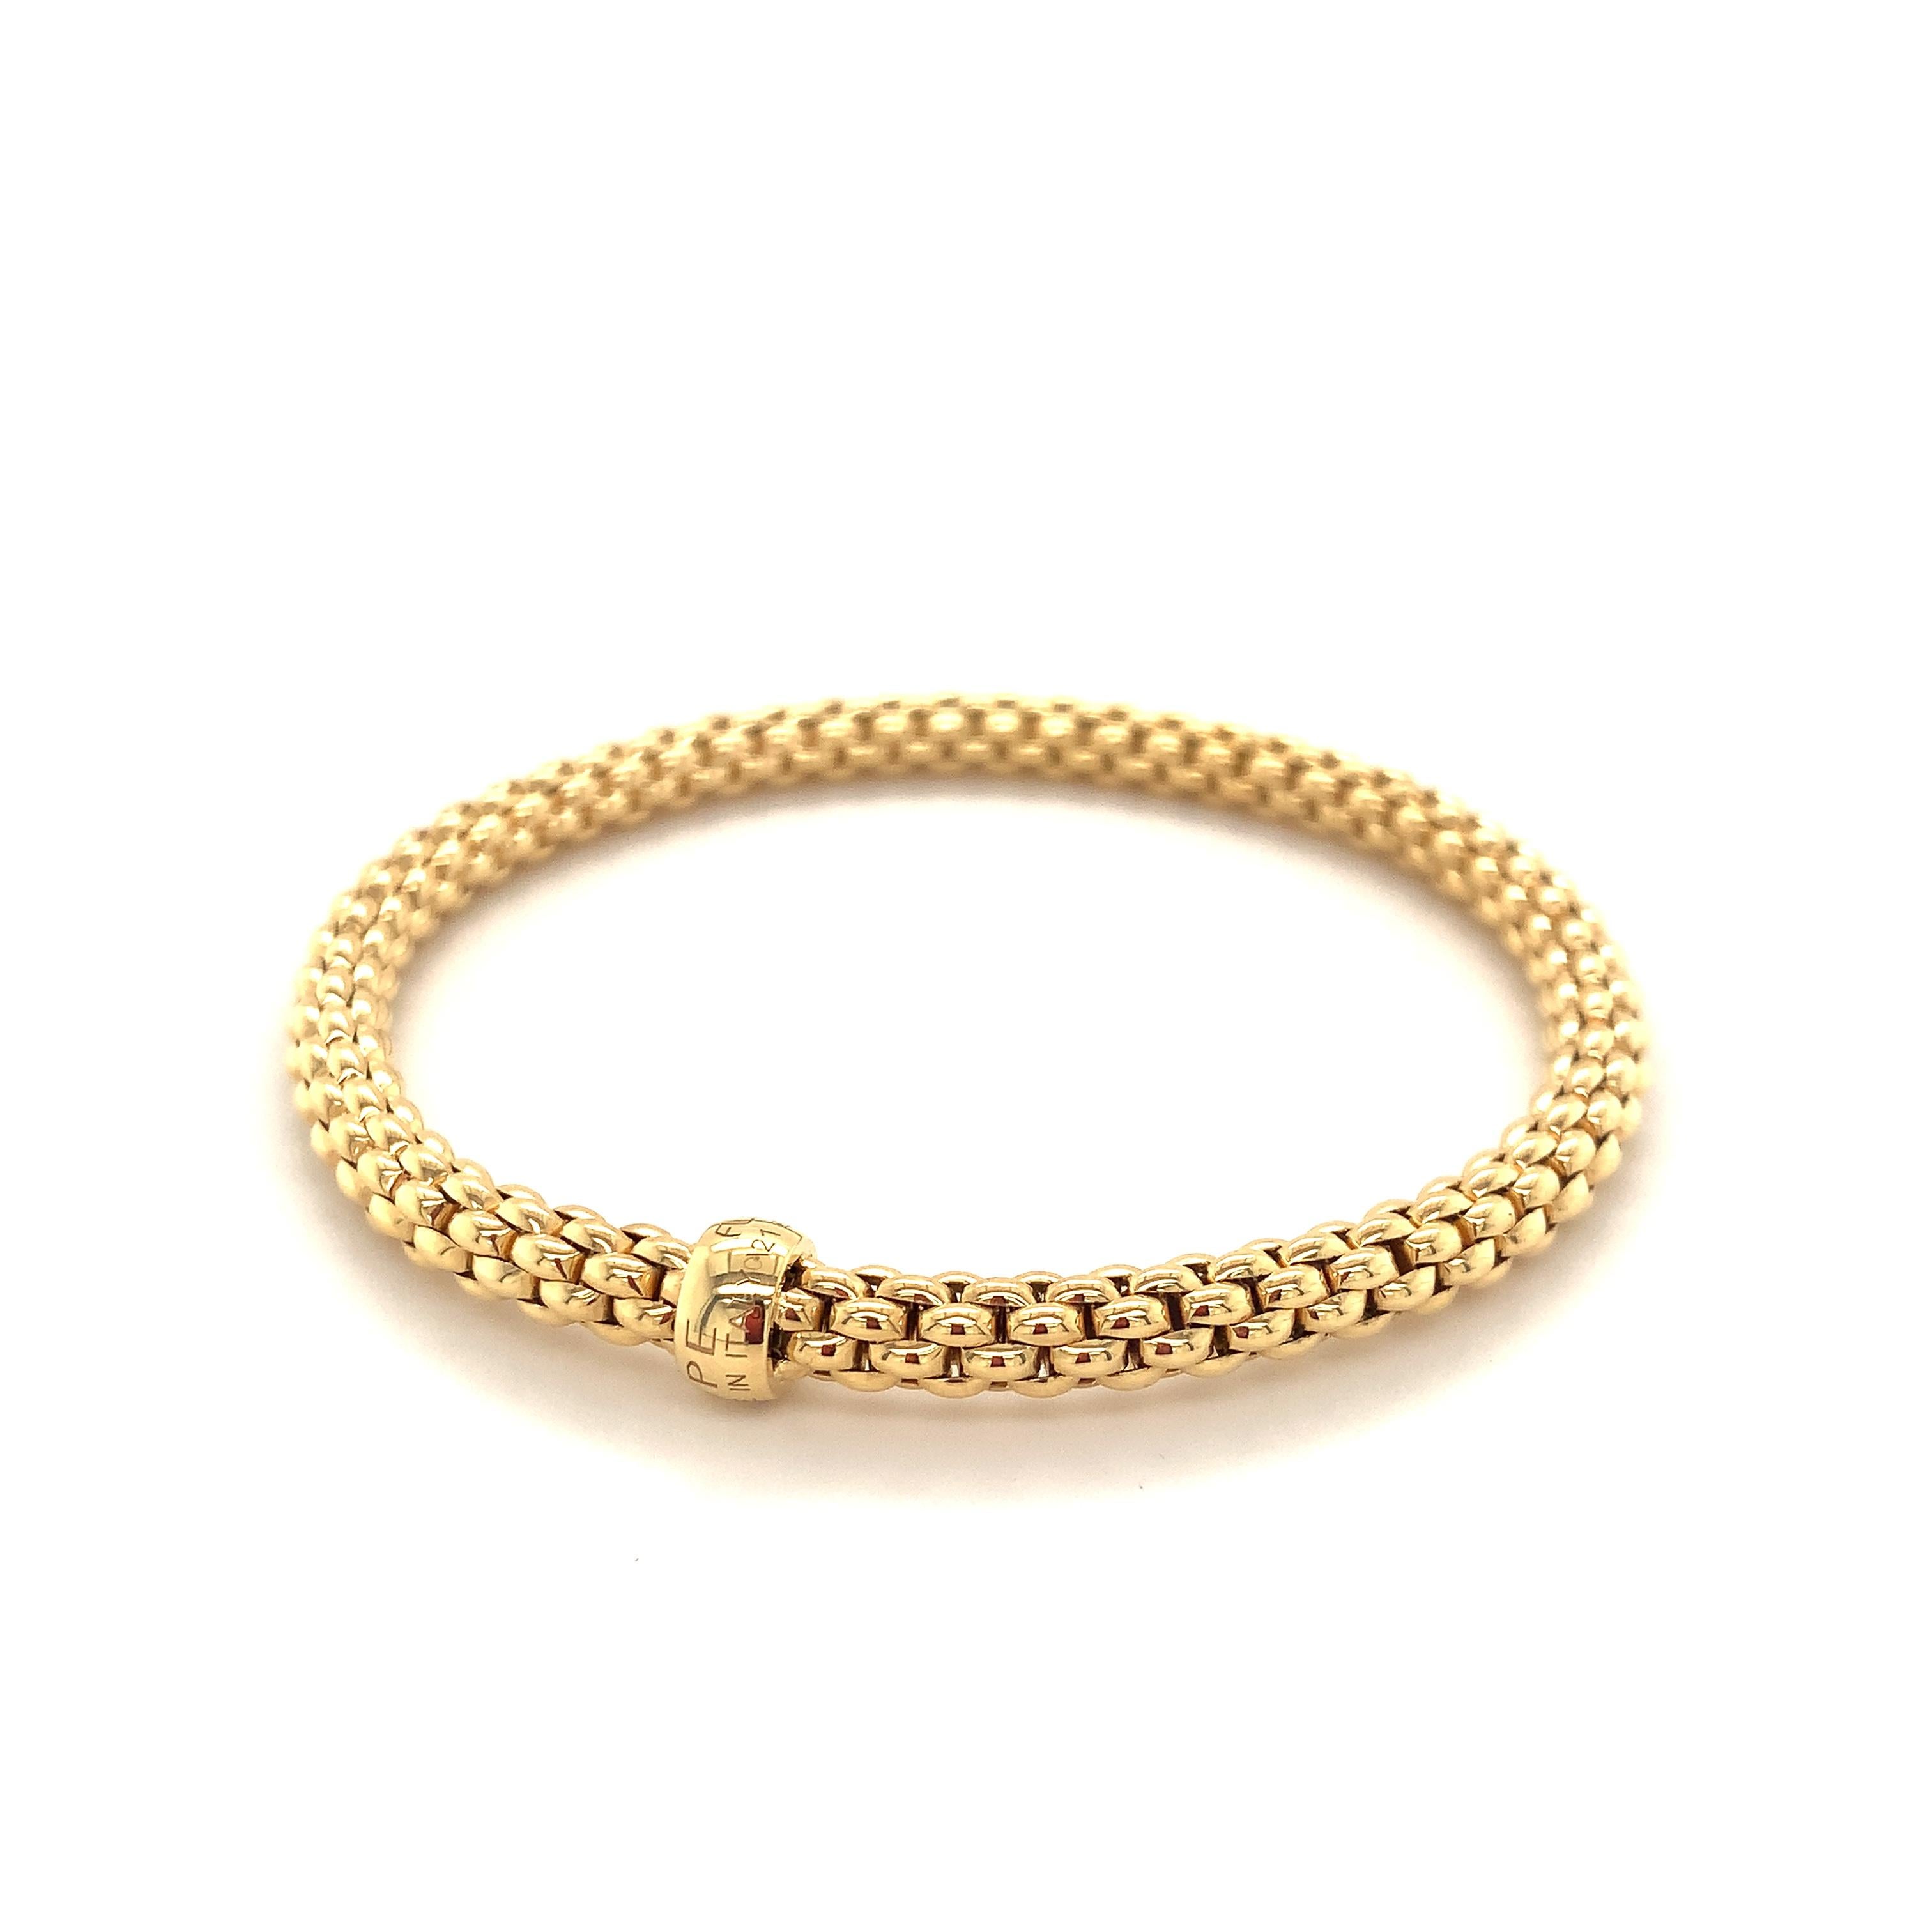 Fope Bracelet 18K Yellow Gold with Solid Gold Rondel 620BM-G 5